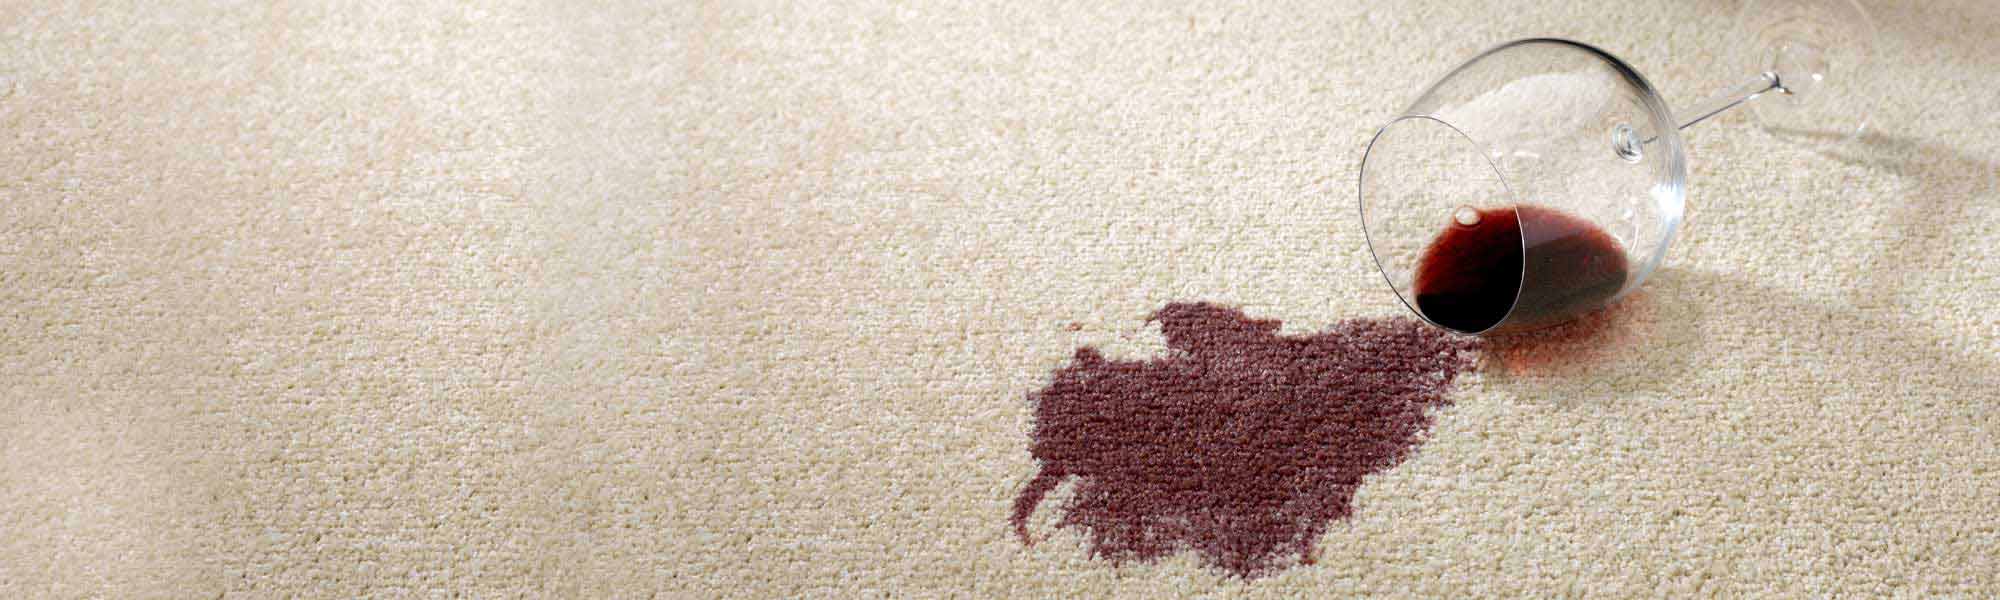 Professional Stain Removal Service in Stockton by Mark Ray's Chem-Dry